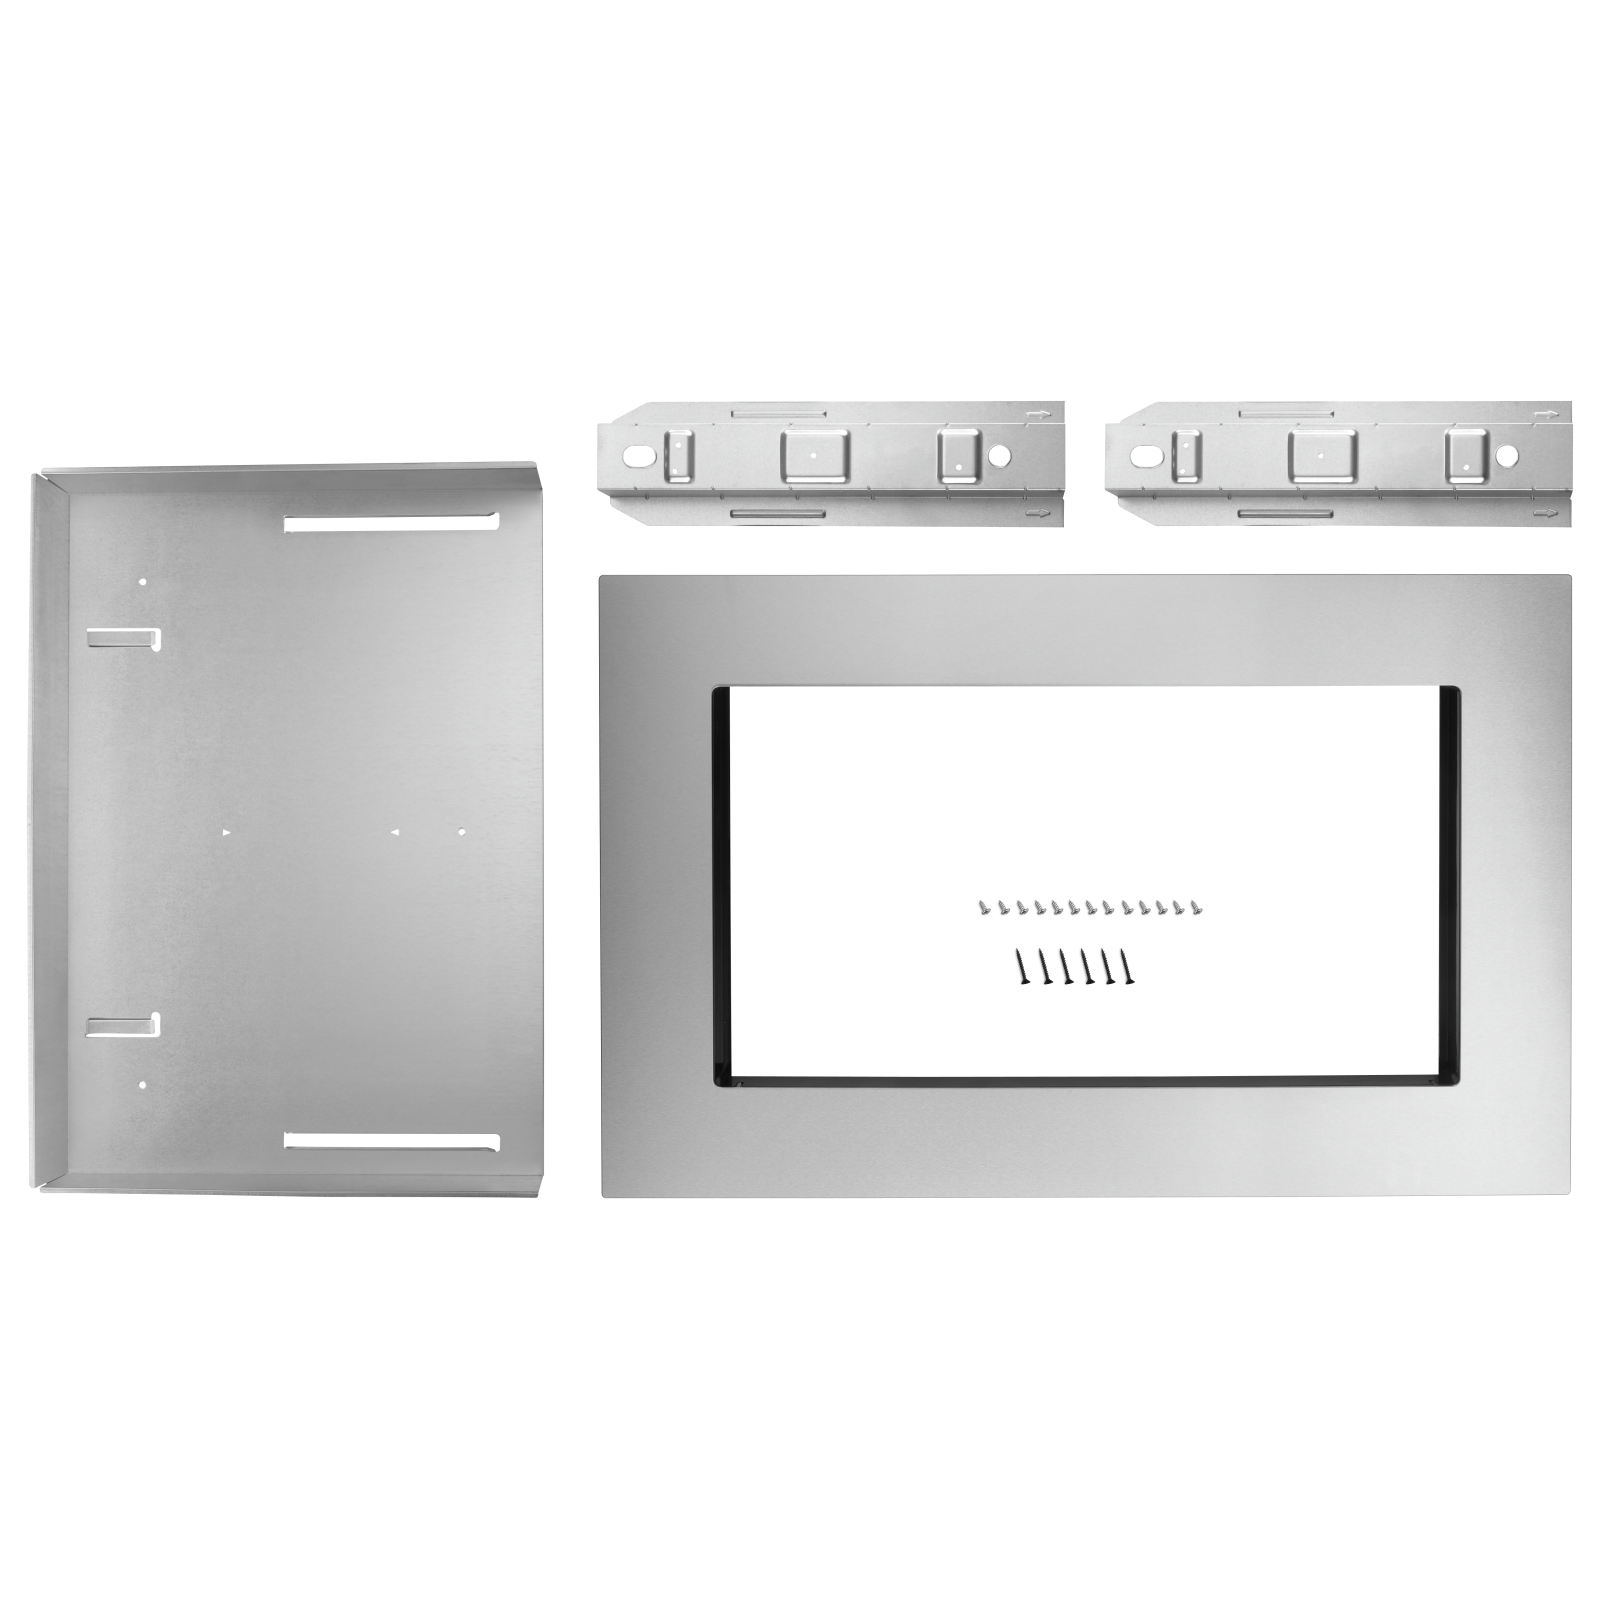 Whirlpool - 30 inch  Countertop Microwave Oven Trim Kit Accessory  in Stainless - MK2160AS